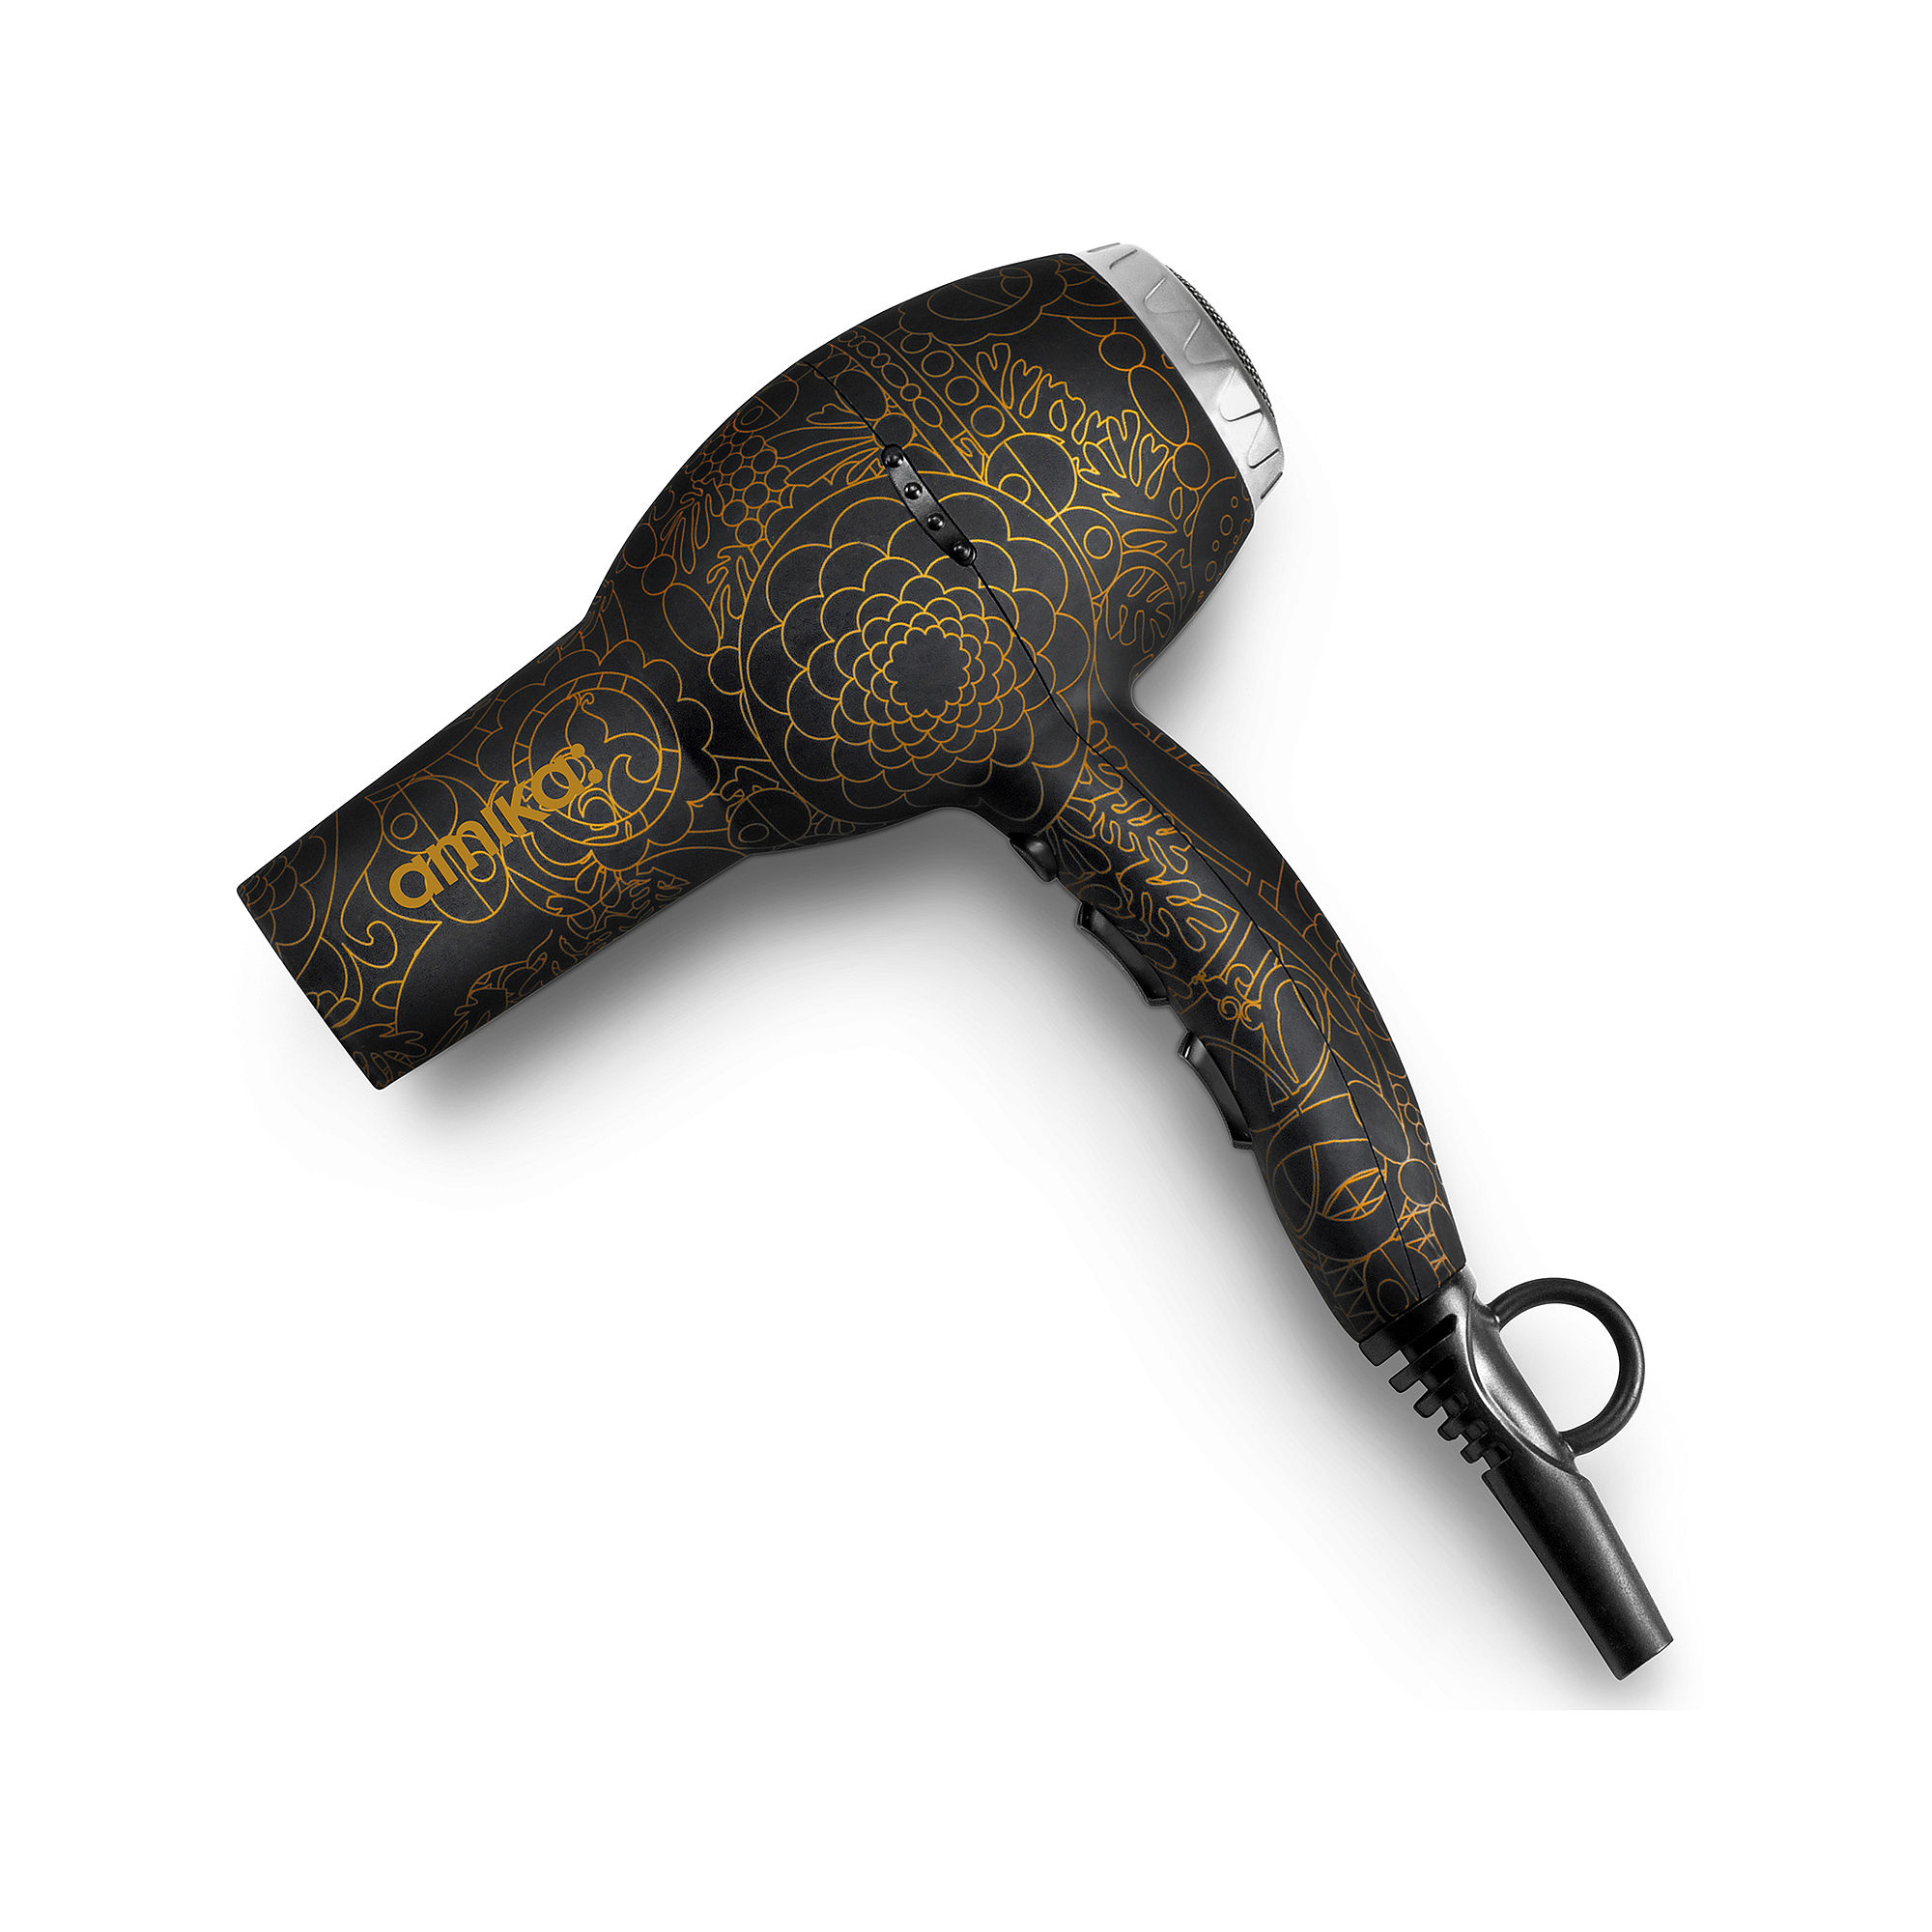 UPC 817574015015 product image for amika Black Bronze Power Cloud Force Hair Dryer | upcitemdb.com